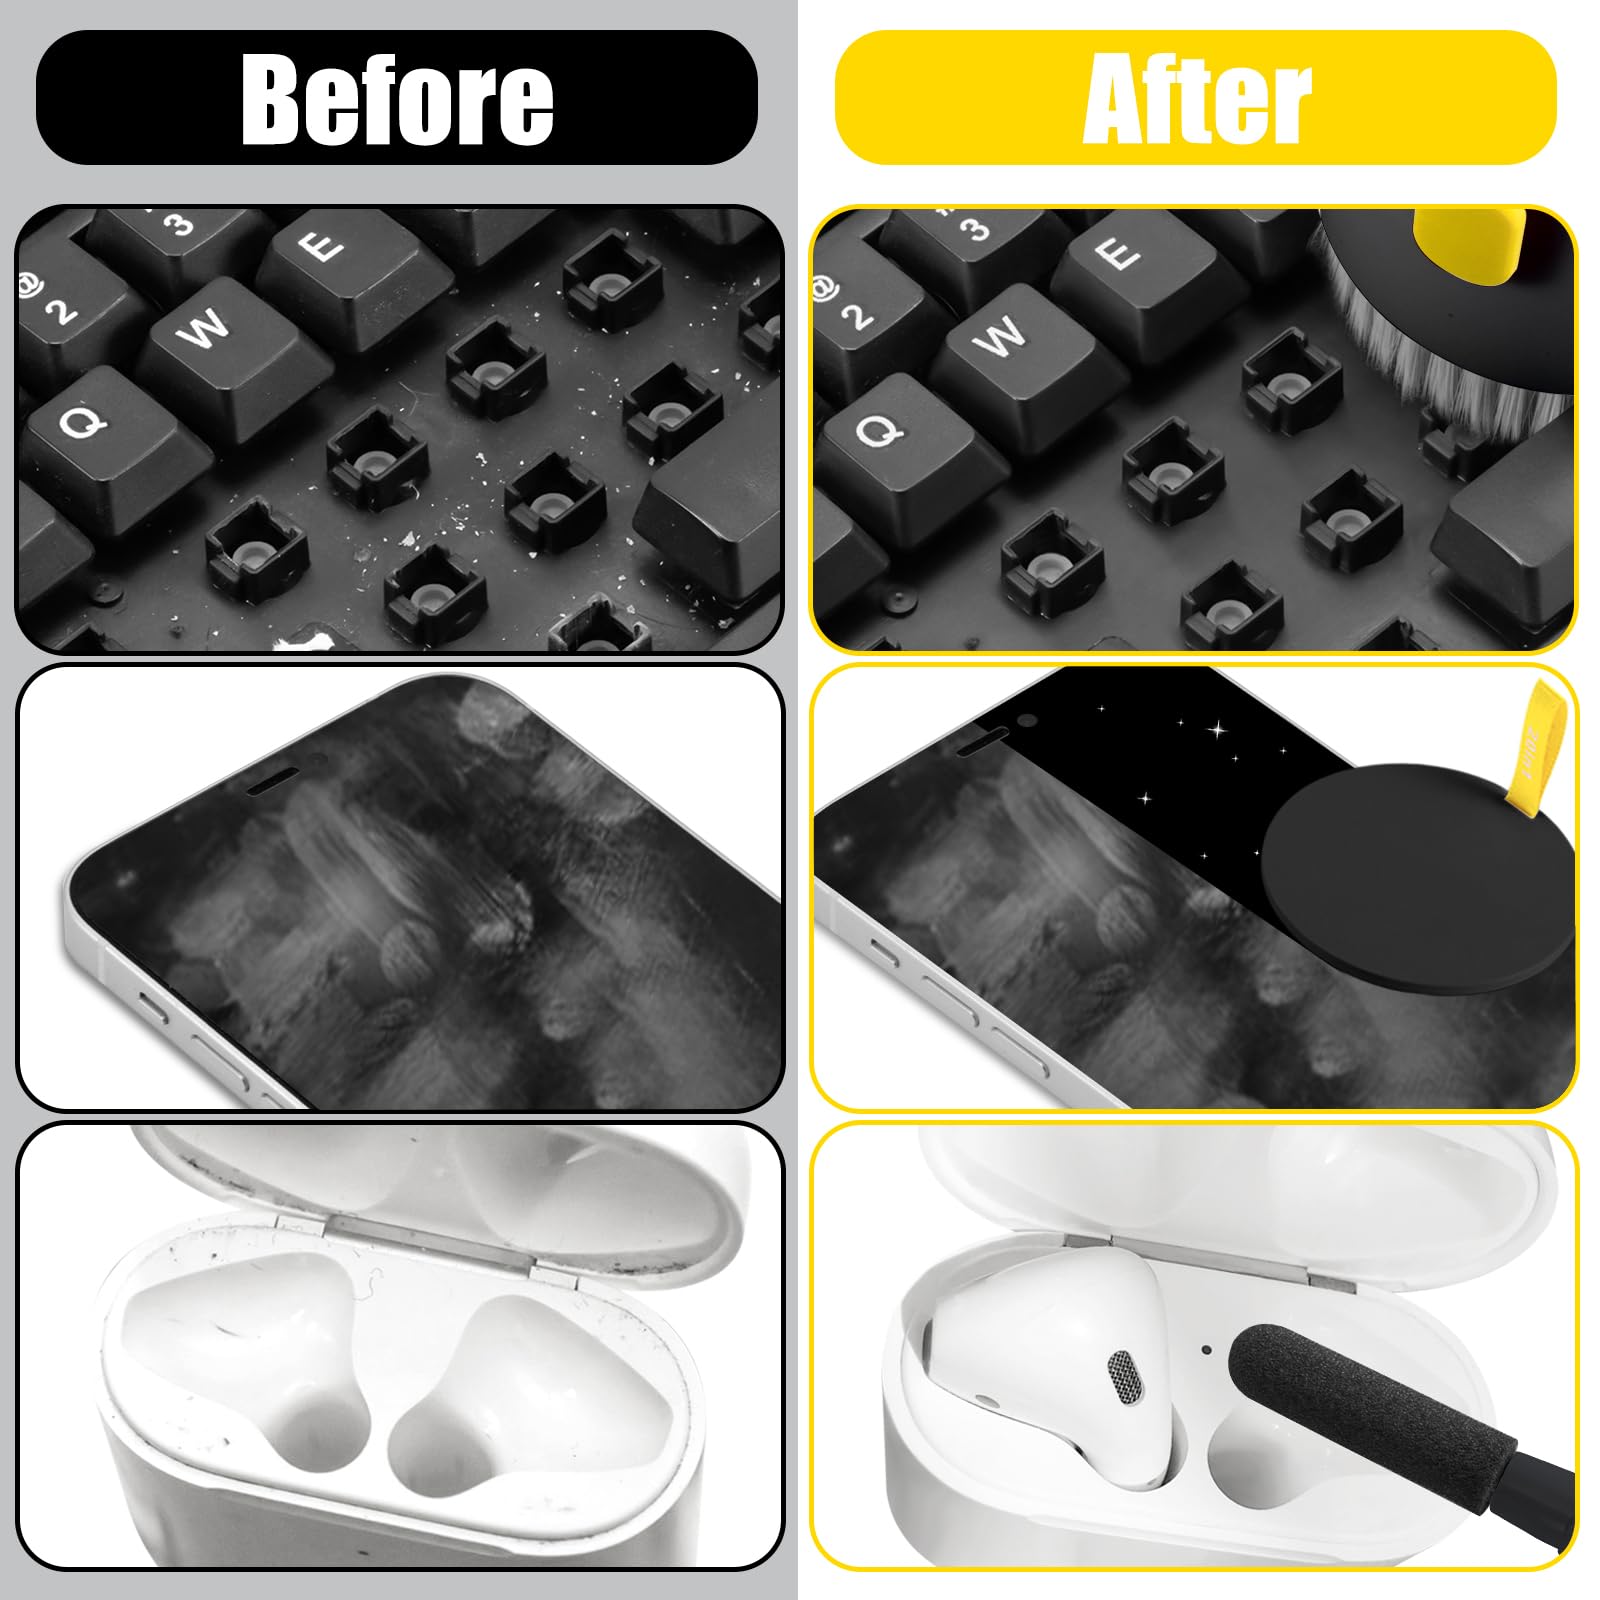 Computer Keyboard Cleaner Kit, Laptop Screen Cleaning Spray for iPhone AirPods Cell Phone MacBook iPad Pro, 20-in-1 Electronic Clean Brush Tool for Earbuds iPod PC Monitor TV Earphone Camera - Black